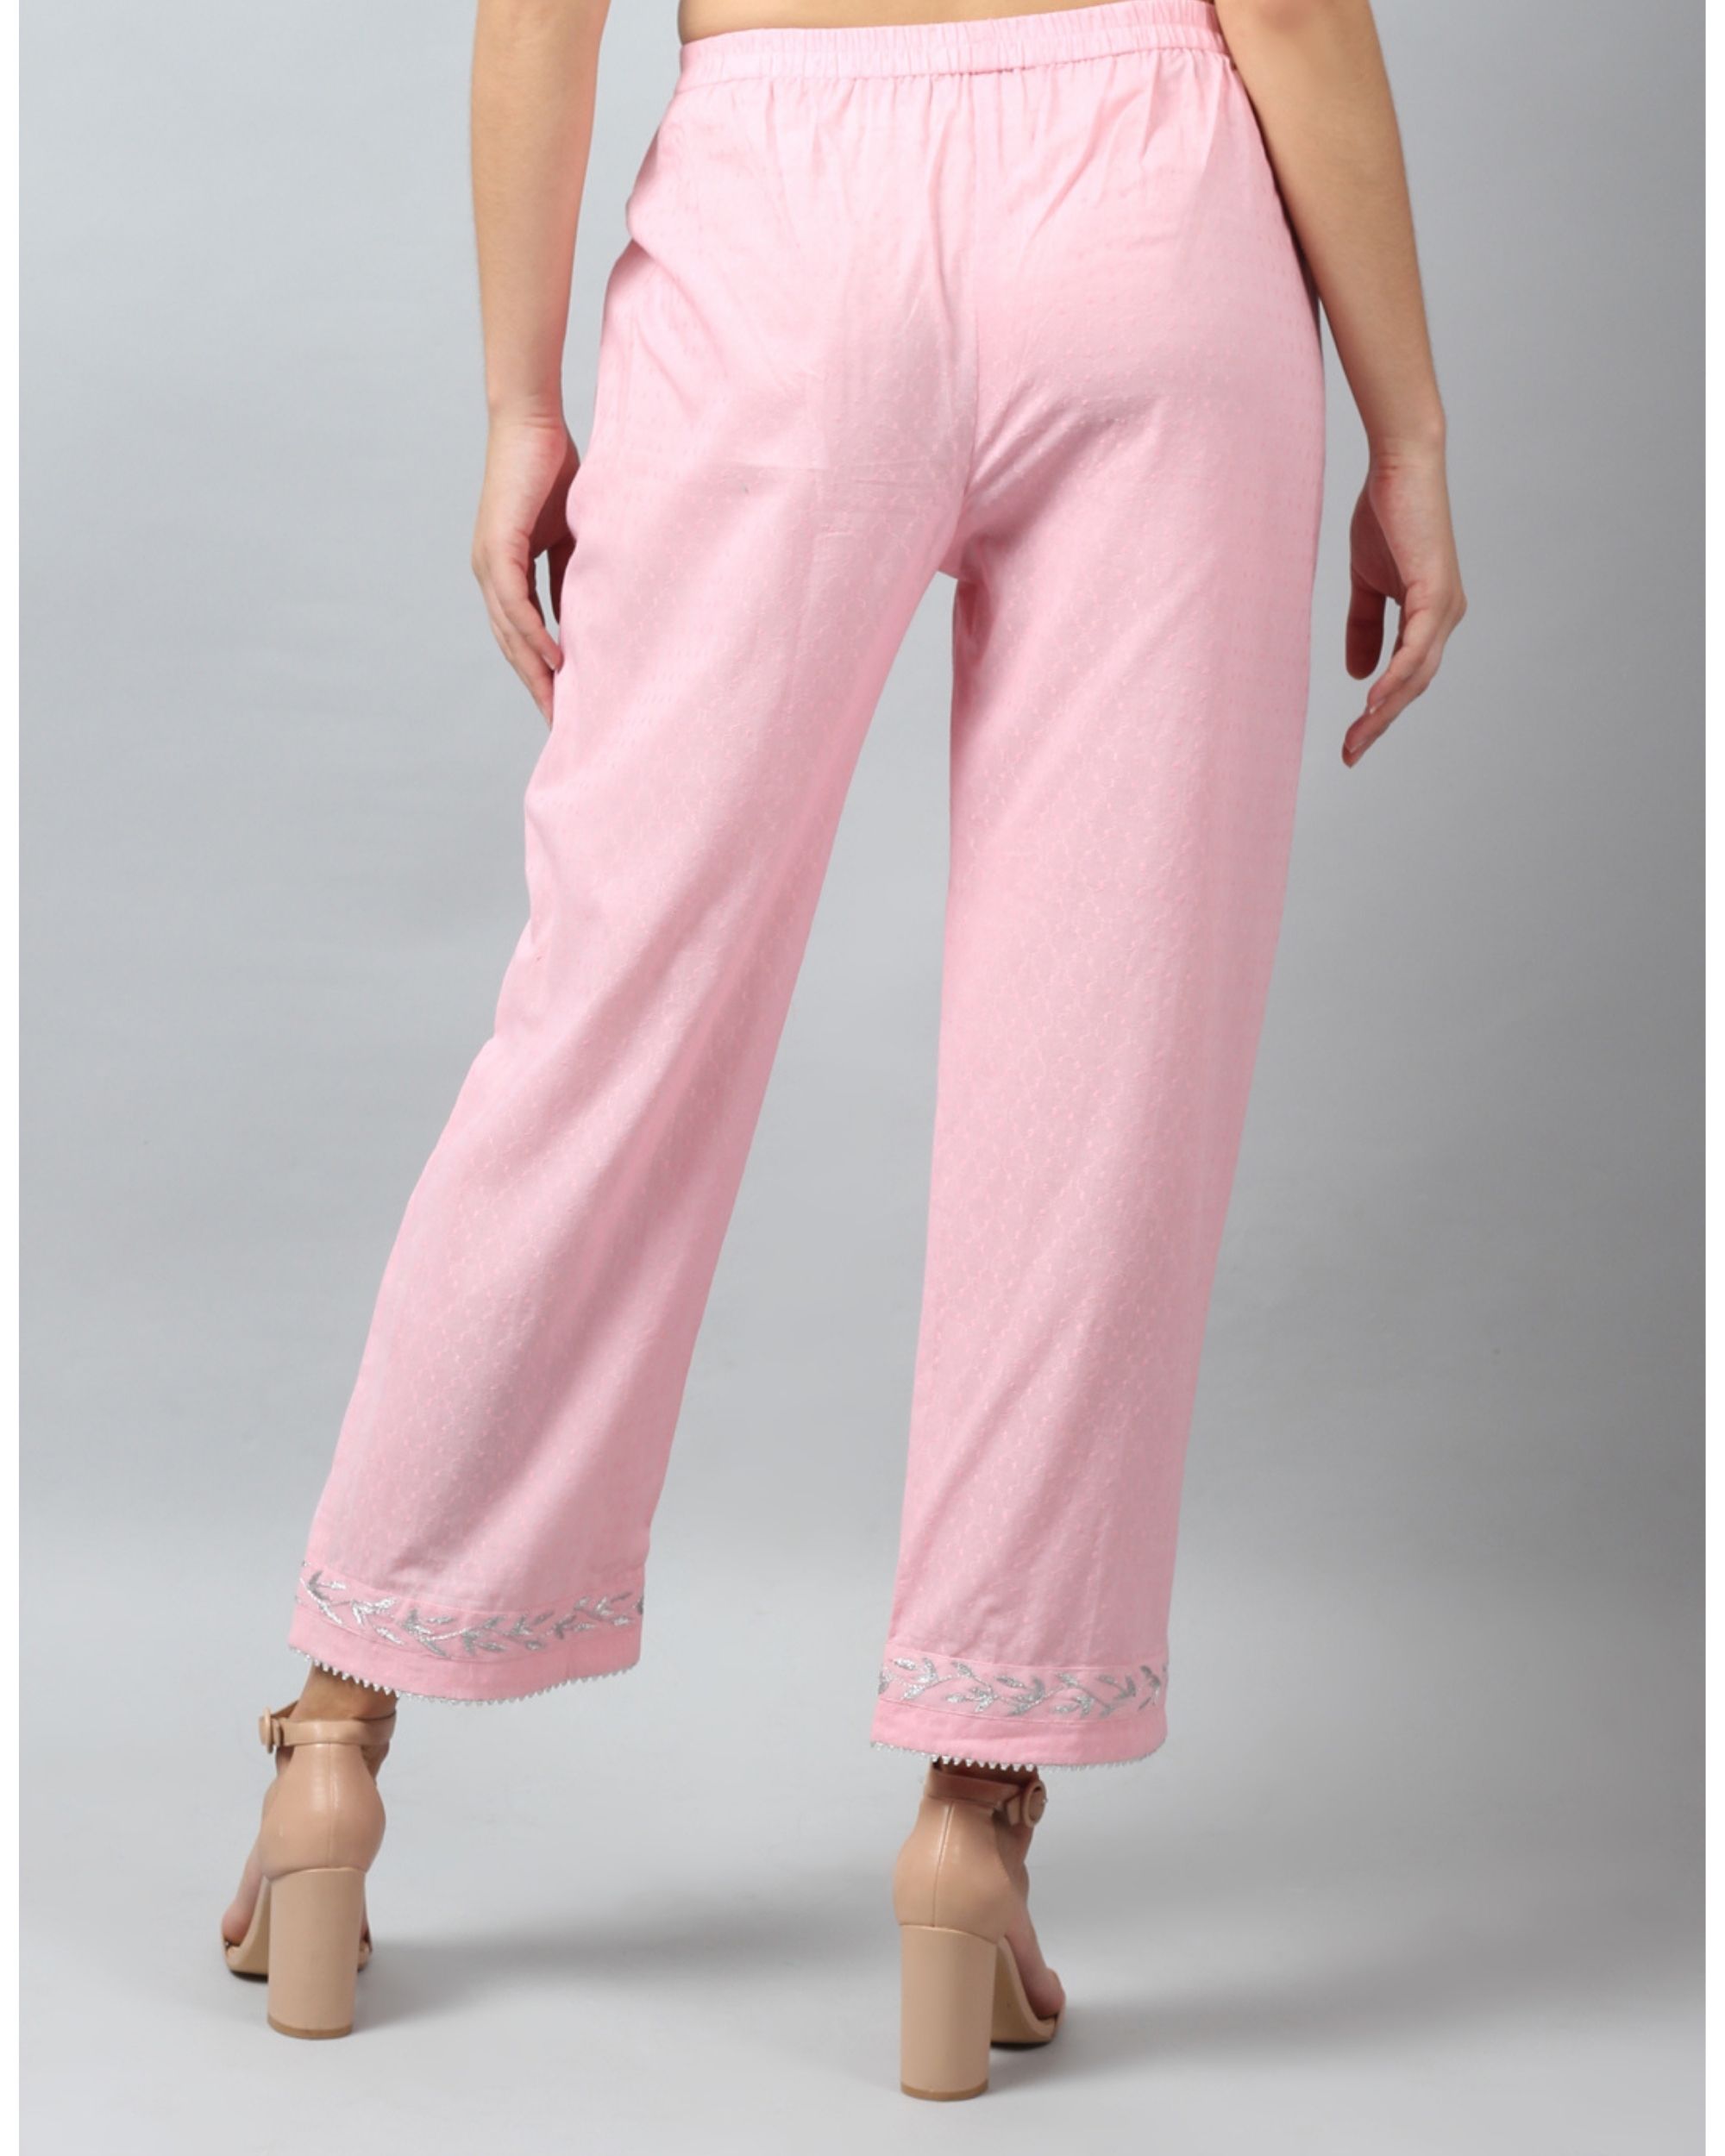 Baby pink embroidered pants by D'ART STUDIO